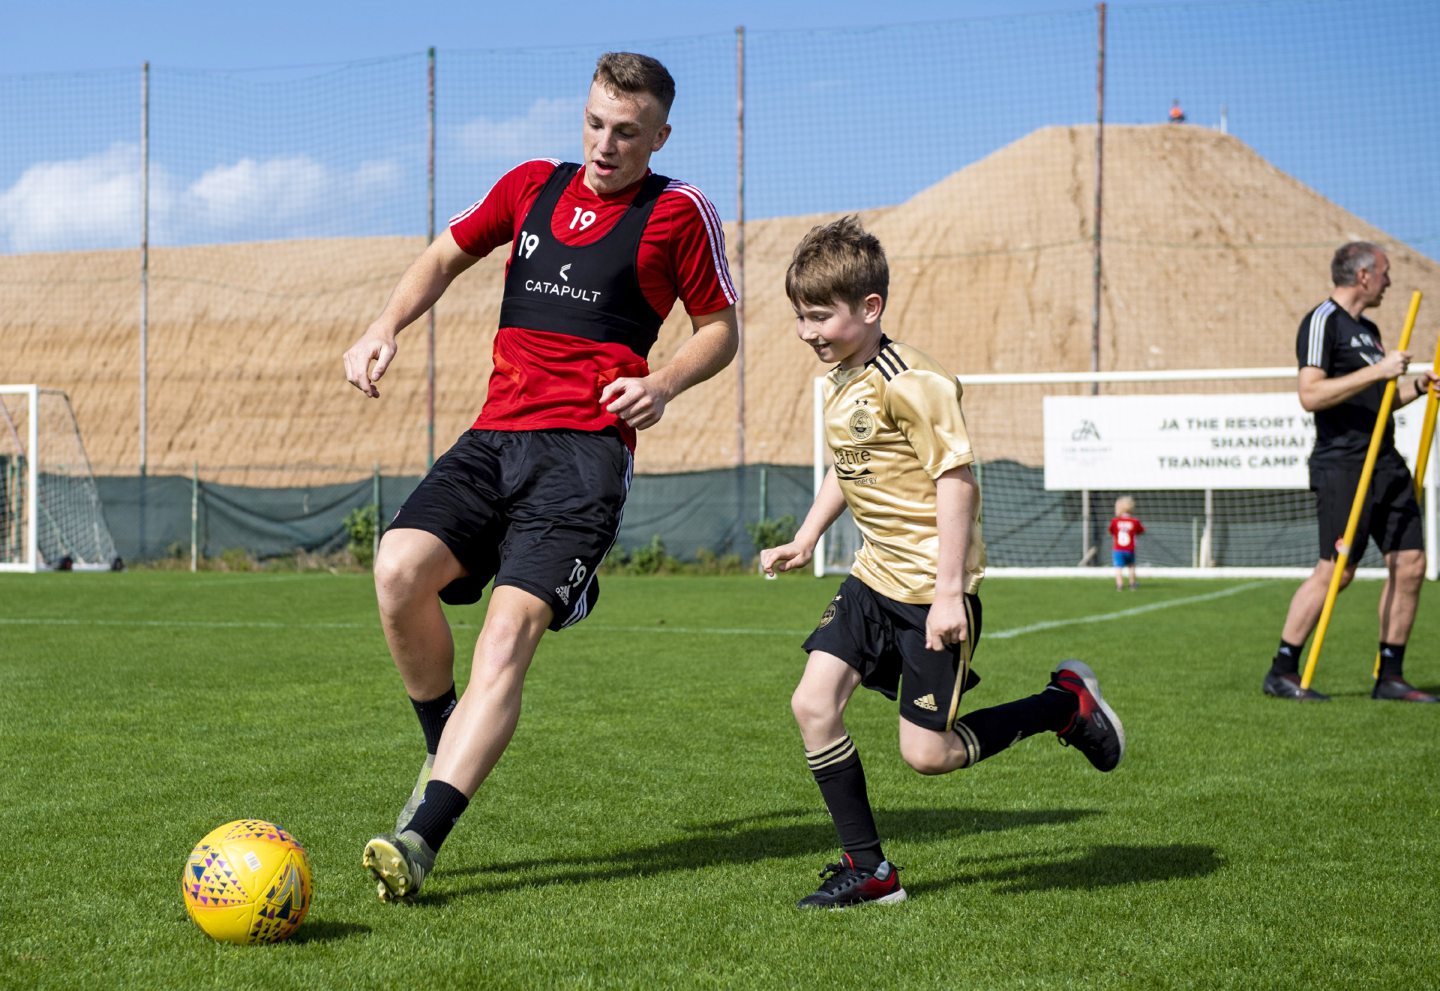 Former Aberdeen midfielder Lewis Ferguson and young fan during an open training session in Dubai on January 11, 2020. Image: SNS 